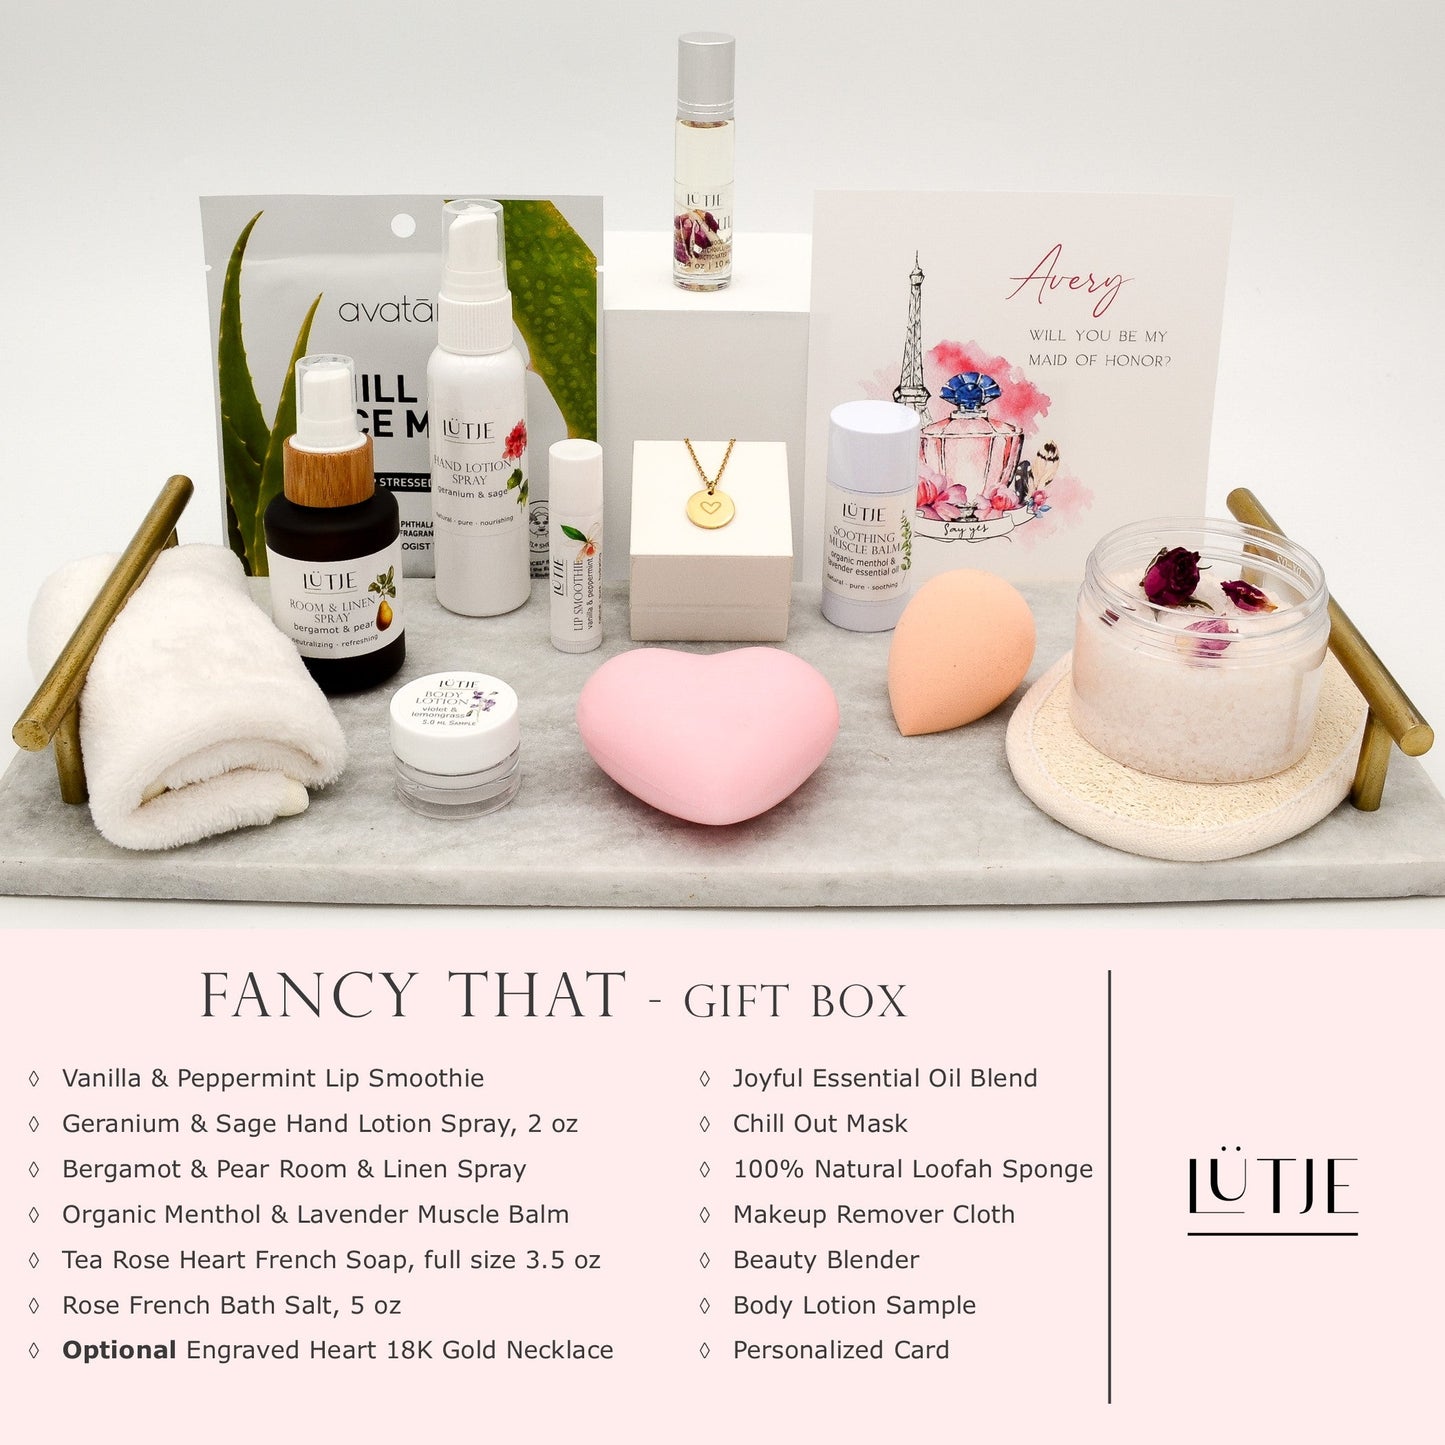 Fancy That Gift Box for women, BFF, wife, daughter, sister, mom, or grandma, includes Geranium & Sage hand lotion spray, essential oil, lip balm, soothing muscle balm, Bergamot & Pear room & linen spray, French soap, French bath salts, hydrating face mask, other bath, spa and self-care items, and 18K gold-plated necklace with engraved heart.